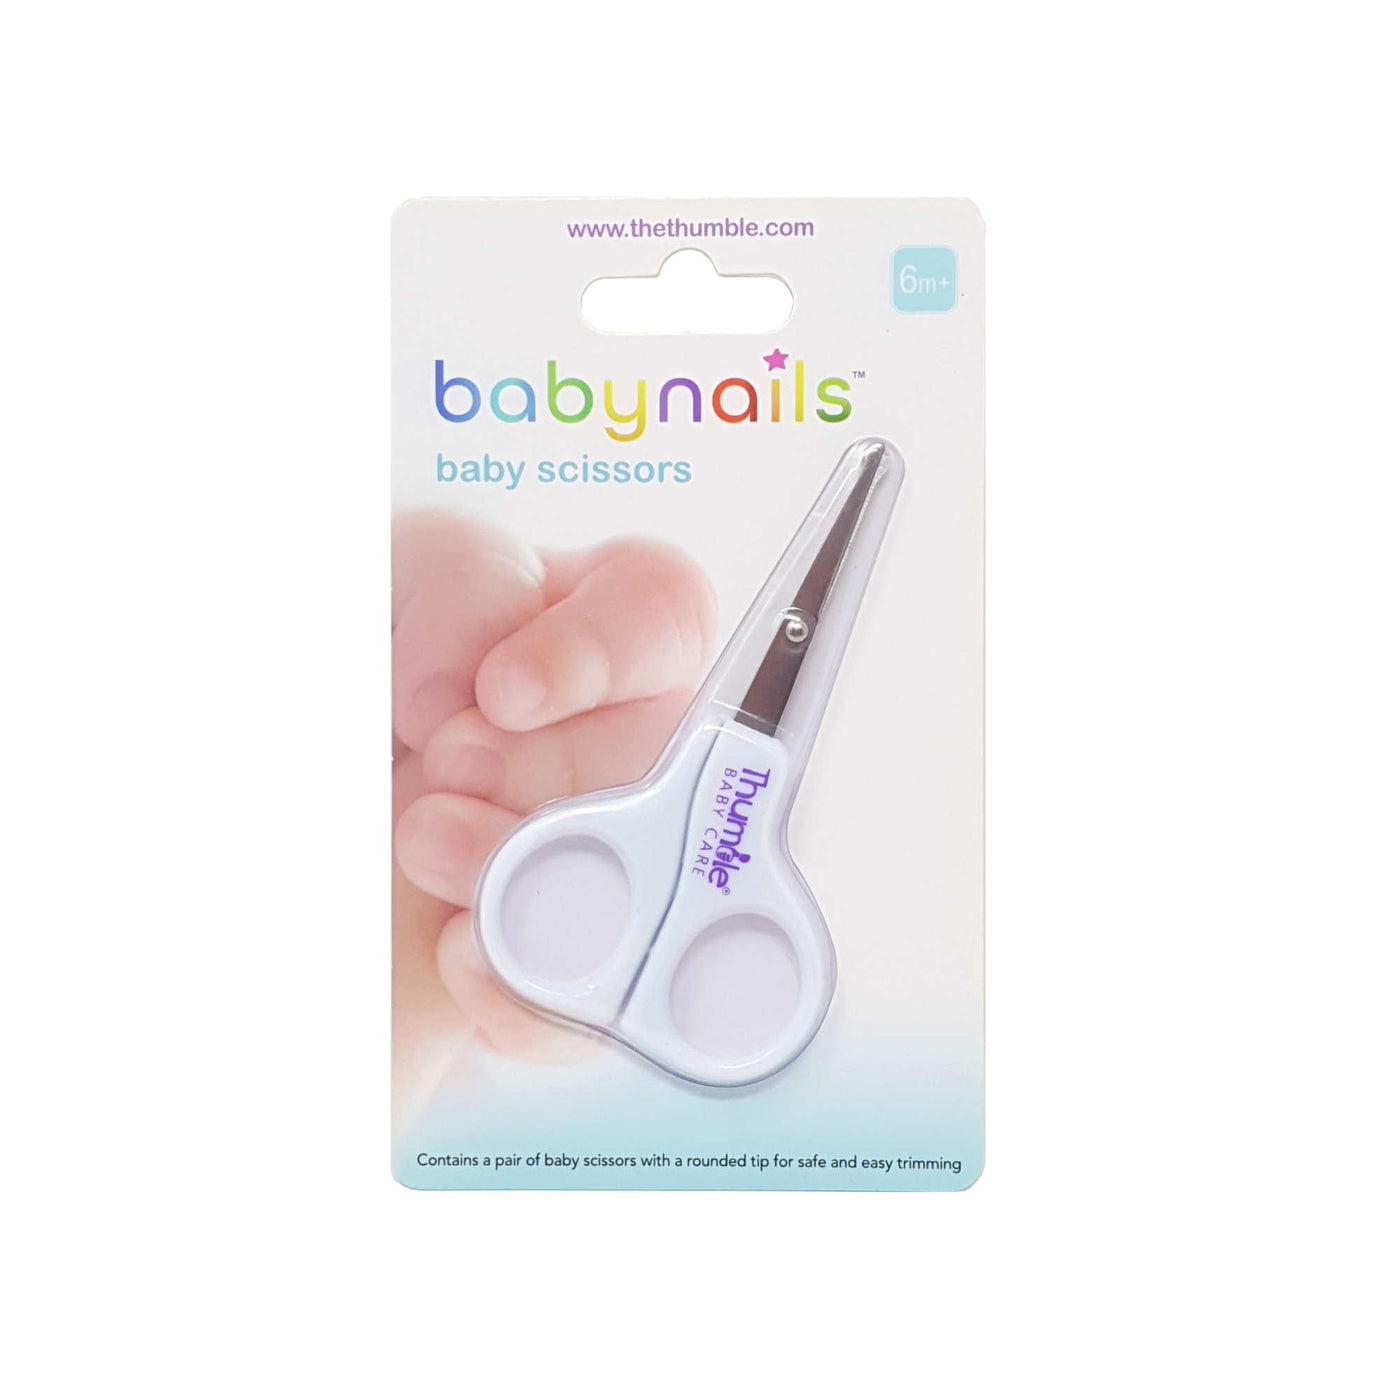 Baby Nails Baby Scissors by Thumble Baby Care